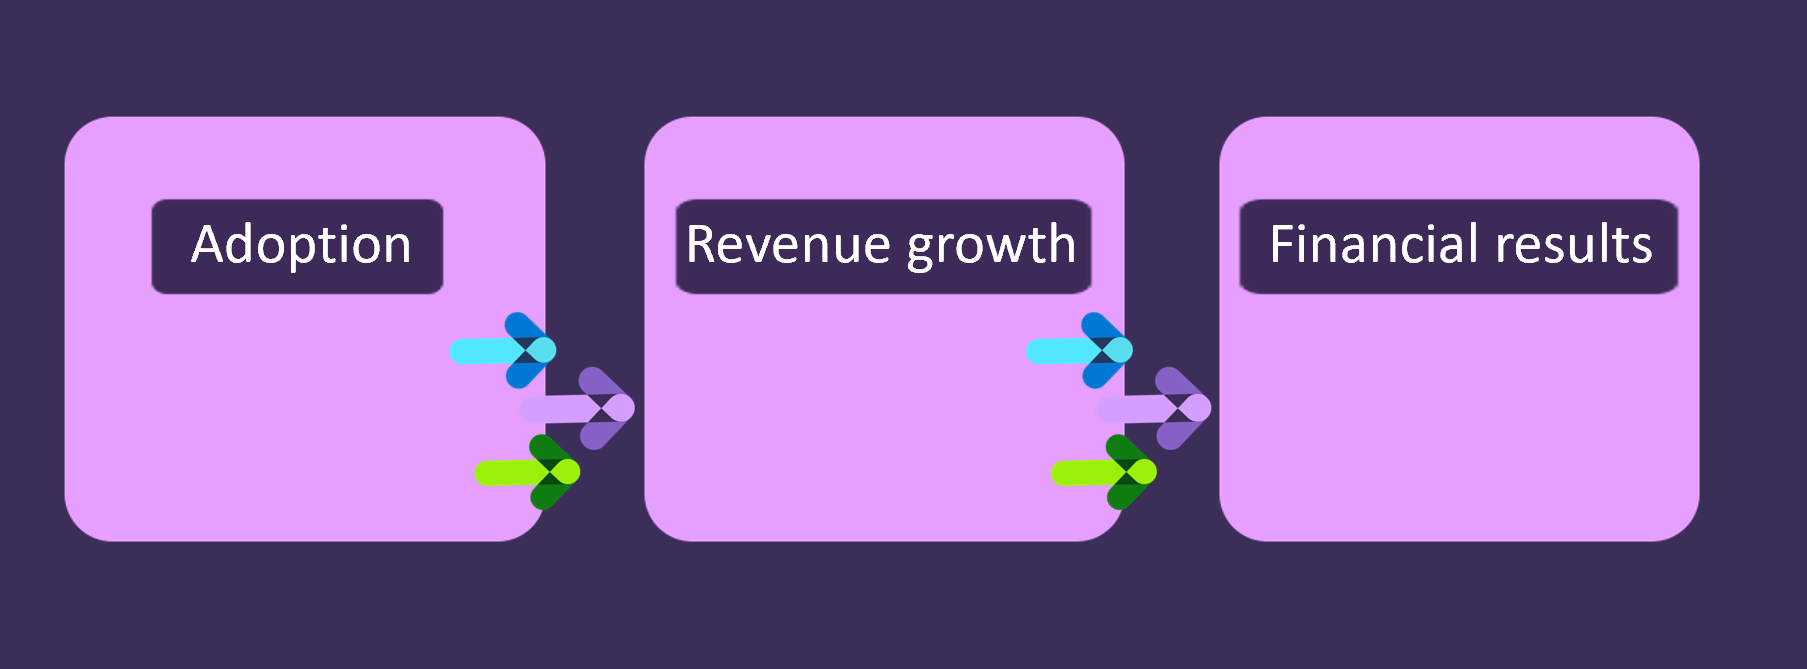 This diagram illustrates how adoption connects to financial results by impacting revenue growth.